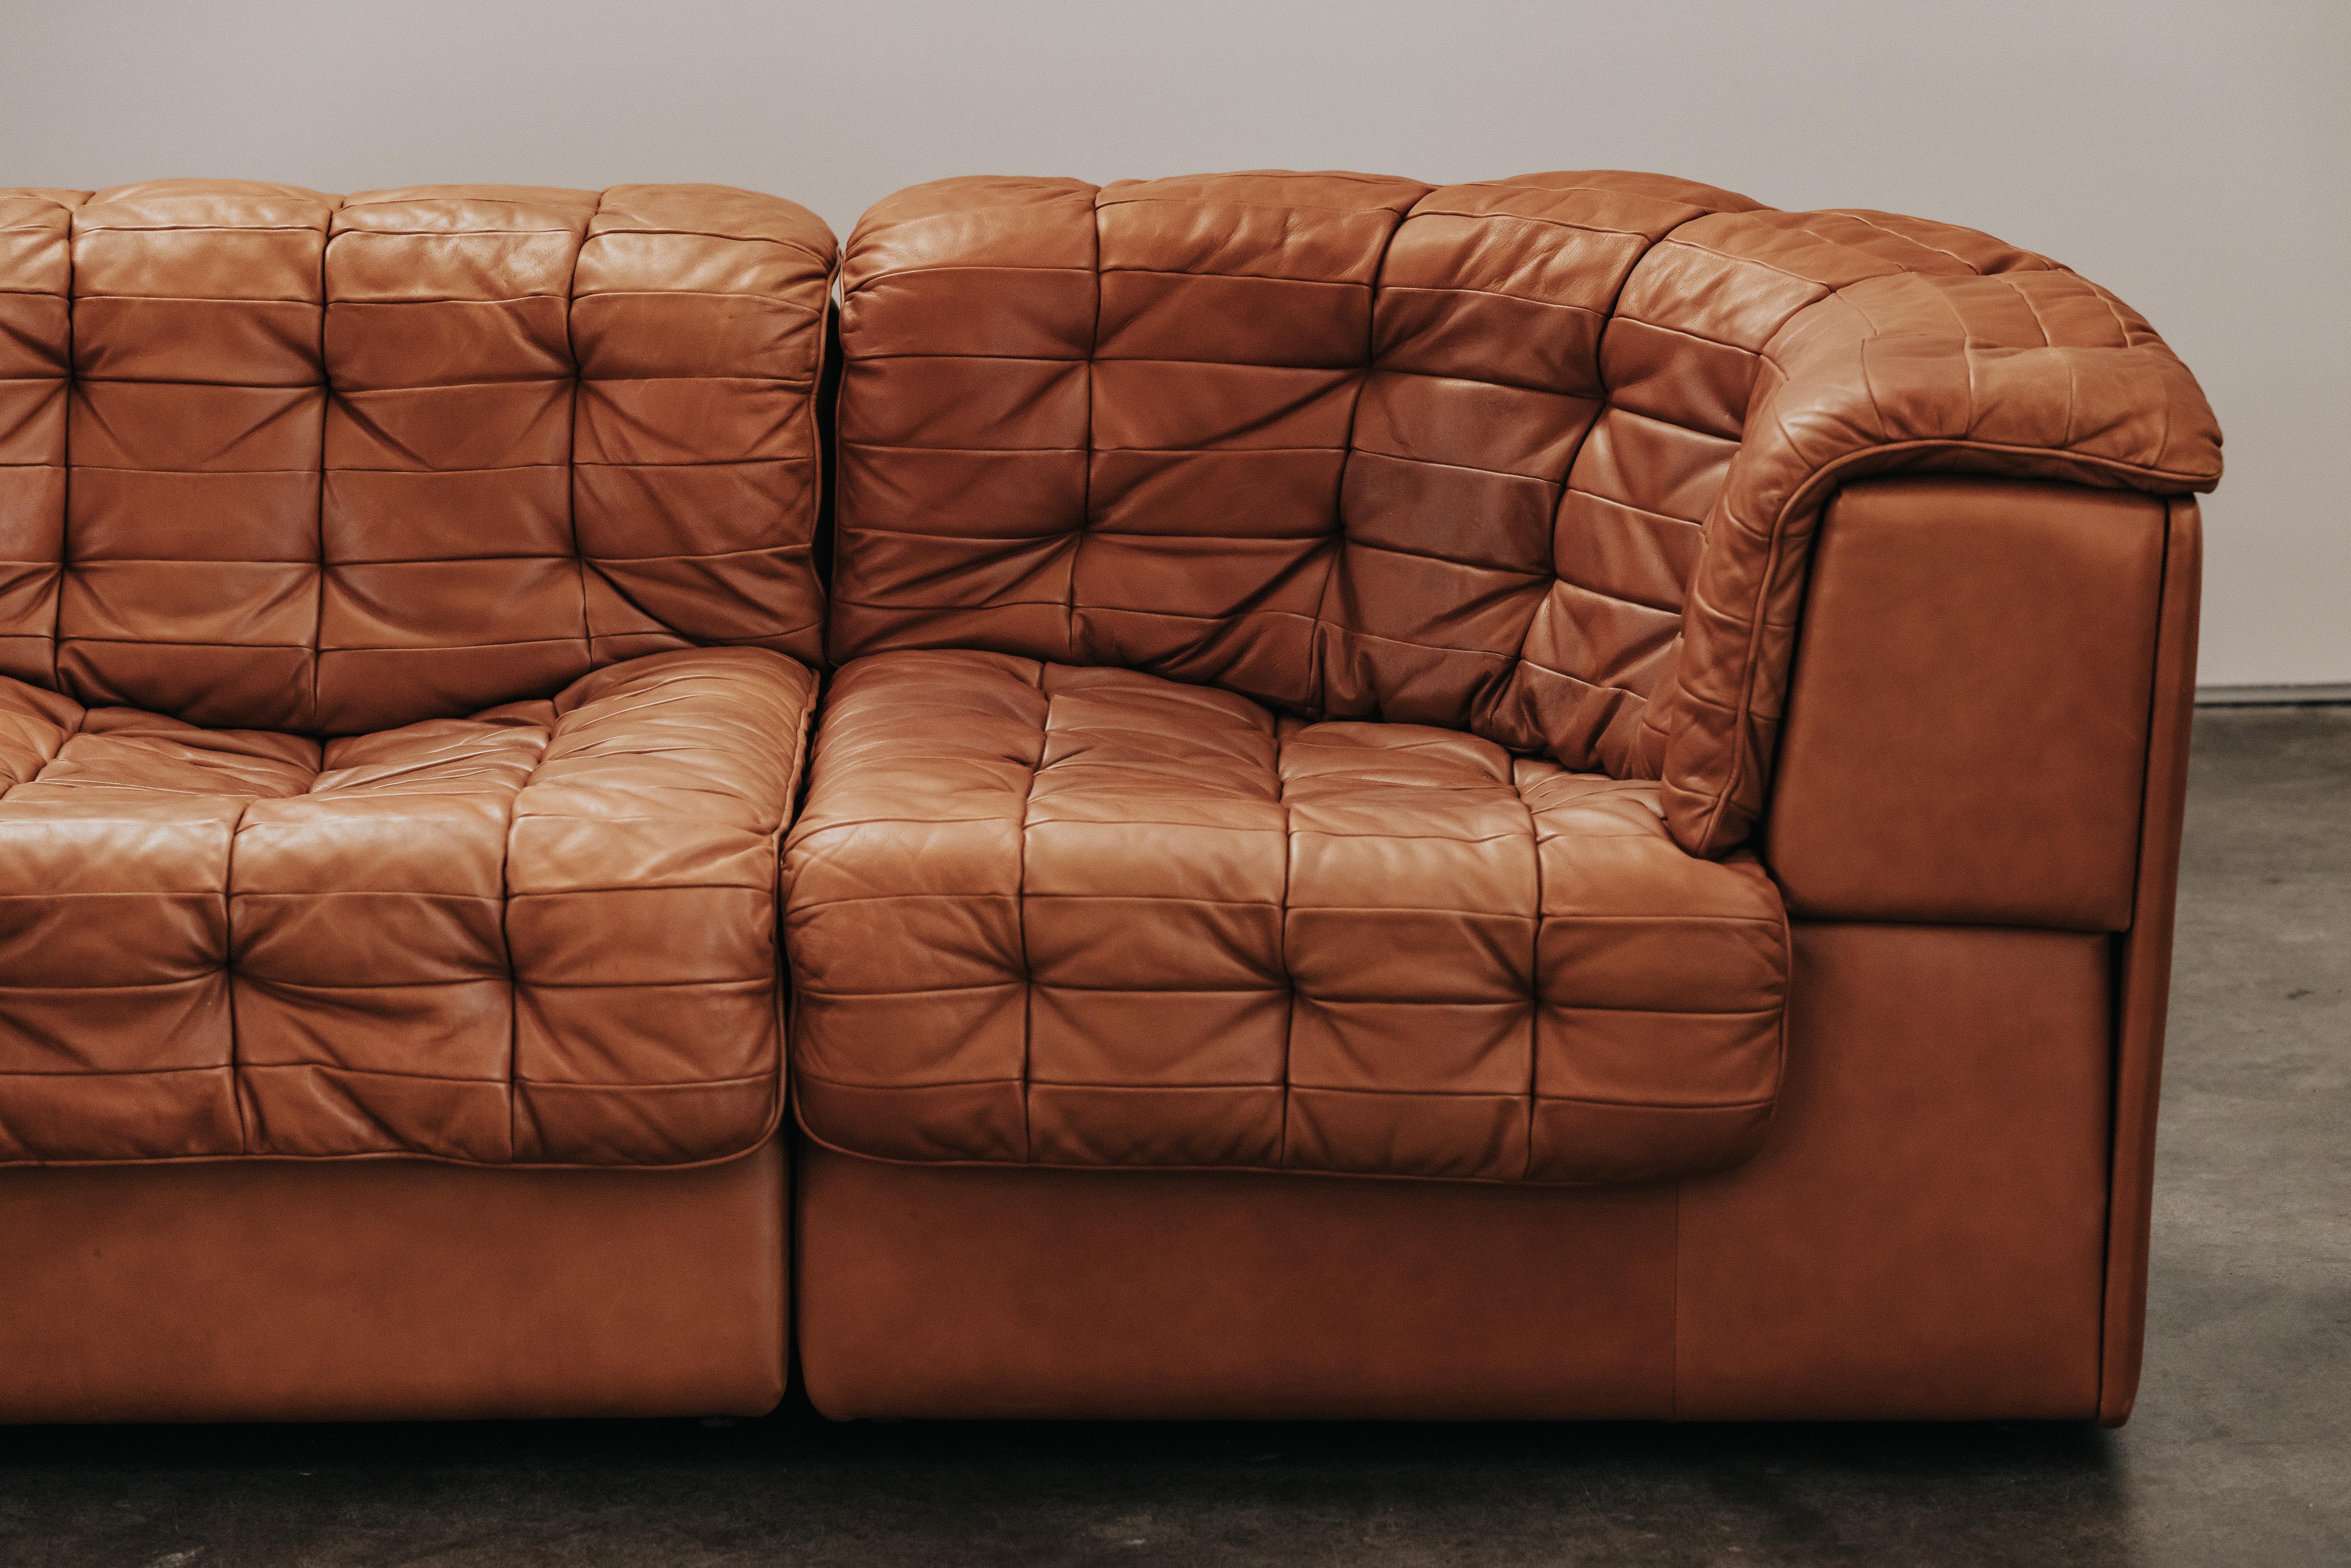 Vintage De Sede DS11 Sofa In Cognac Leather, From Switzerland, Circa 1970.  Very comfortable model with very light wear and use.